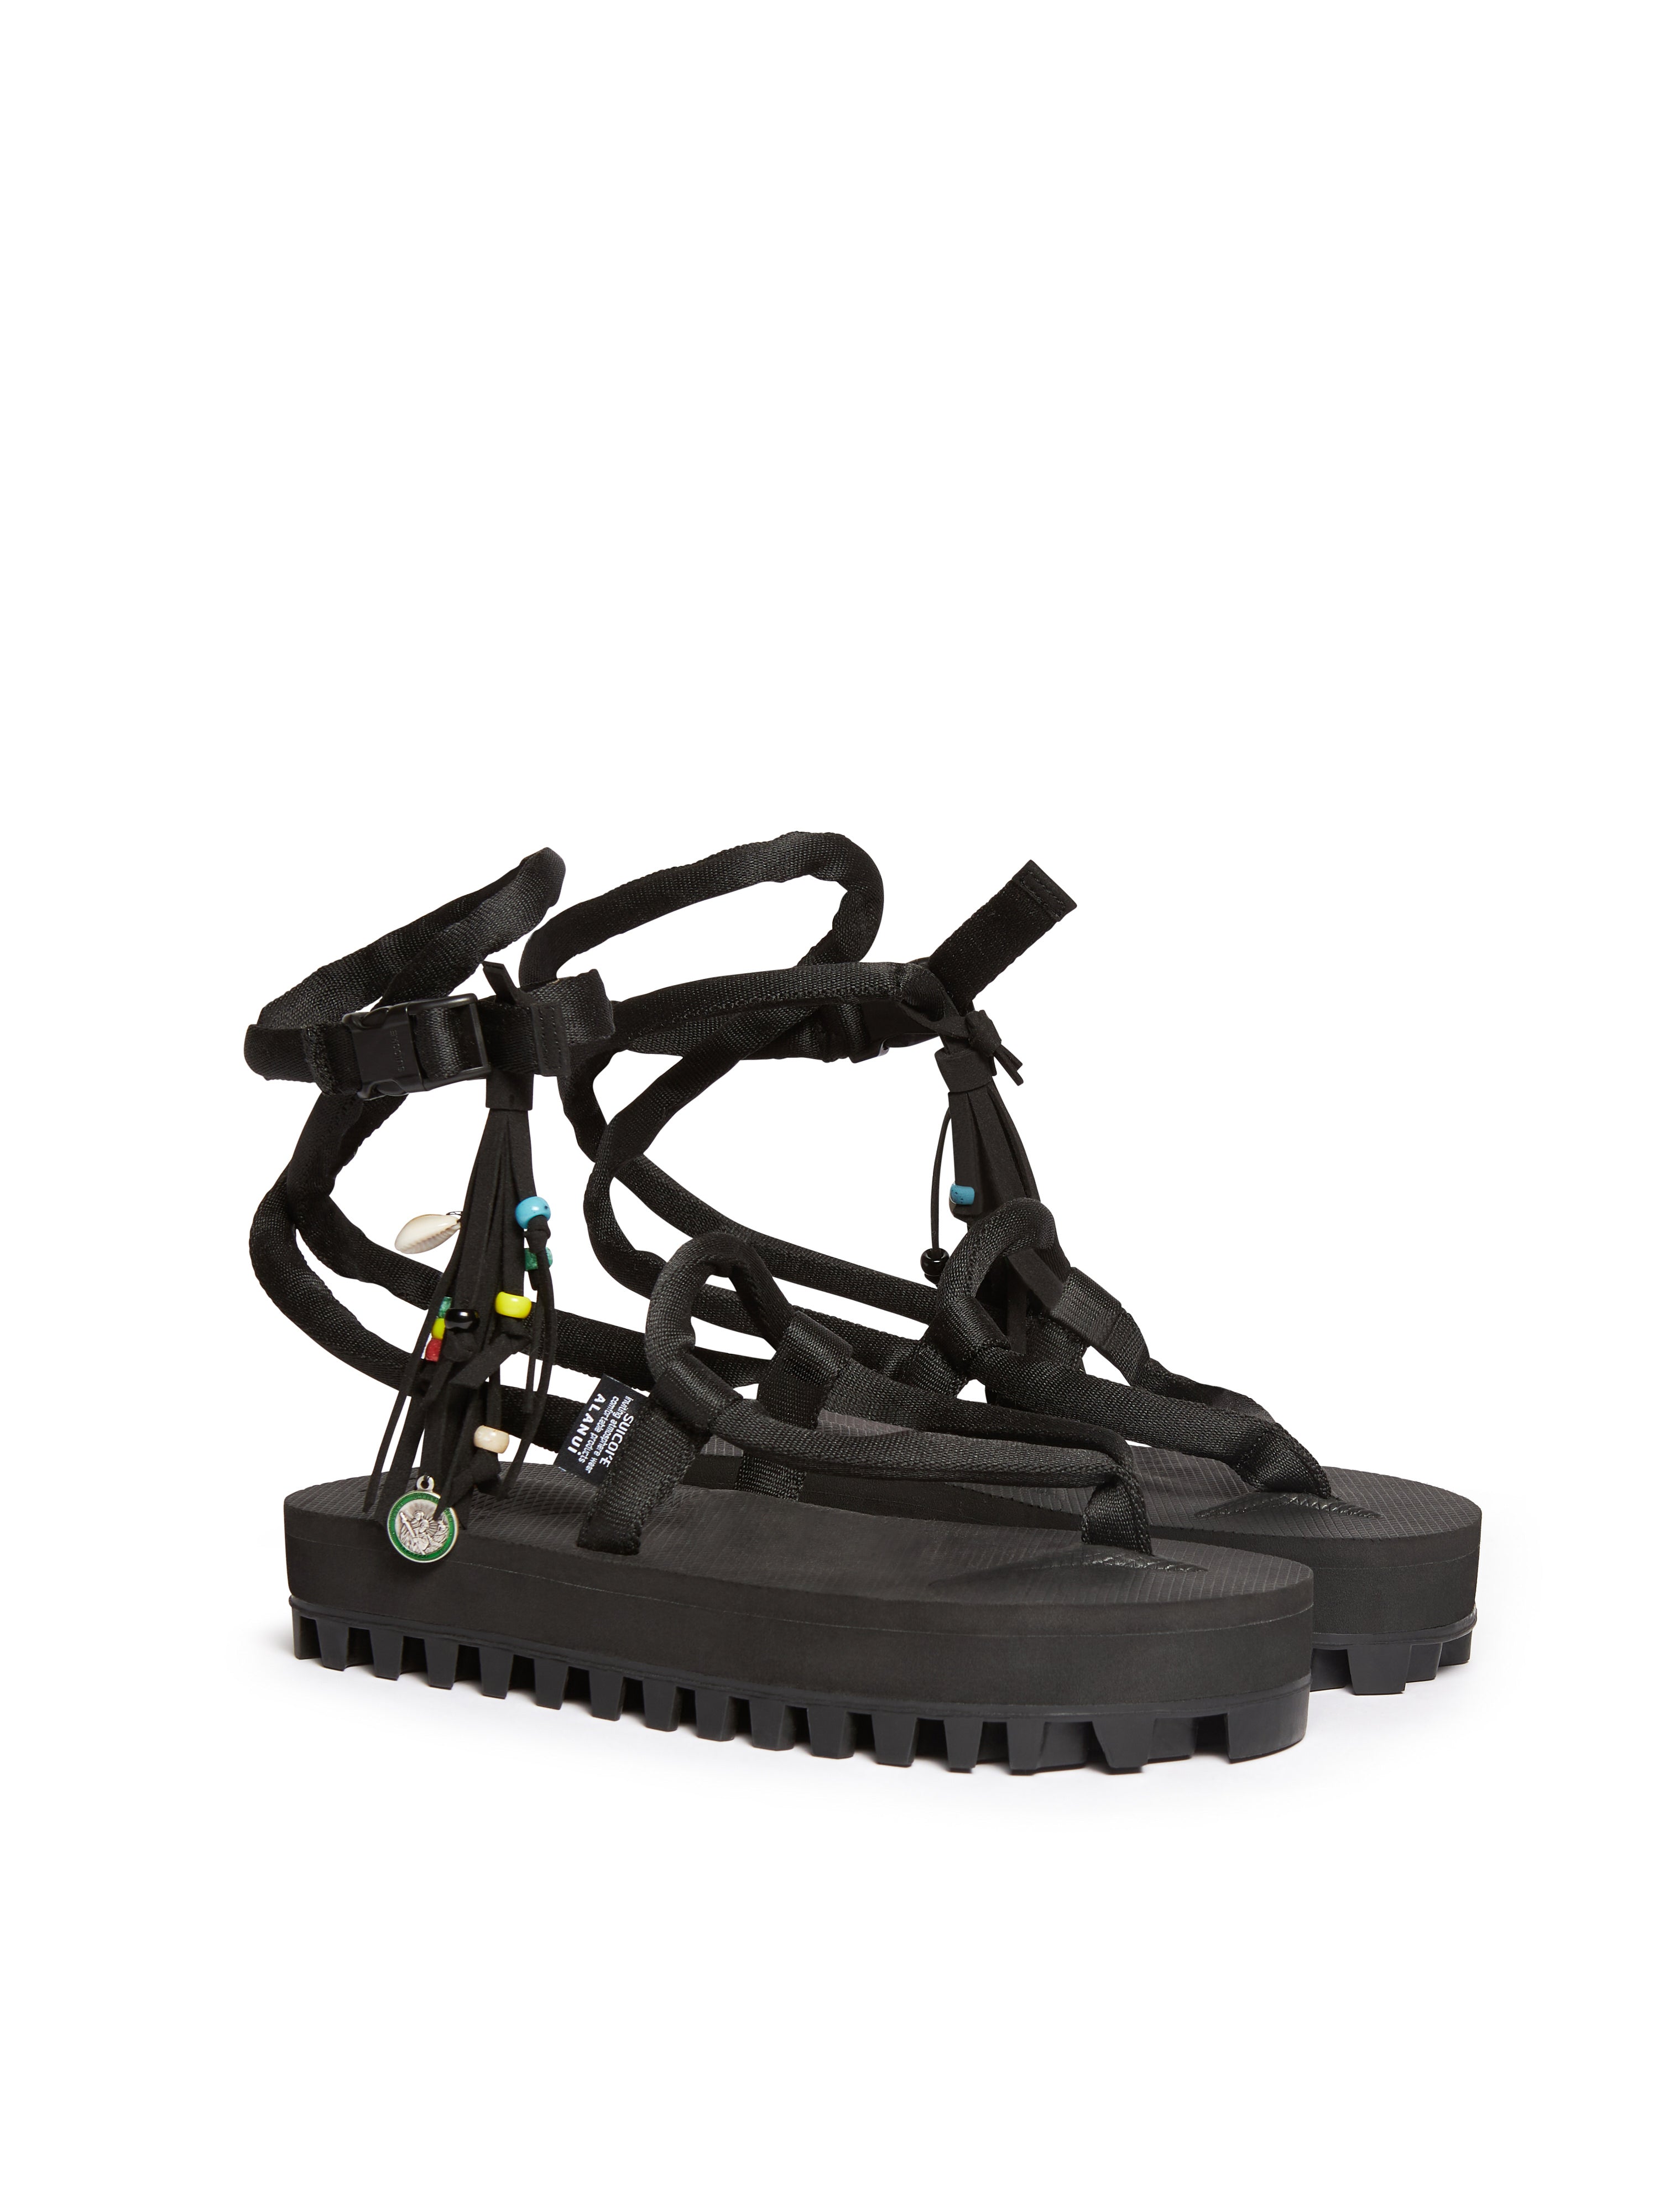 SUICOKE Alanui Edition GUT-HI-ab sandals with Cushioned Nylon Straps w/ Suede Fringe Accents , black midsole and sole. From Spring/Summer 2022 collection on SUICOKE Official US &amp; Canada Webstore.